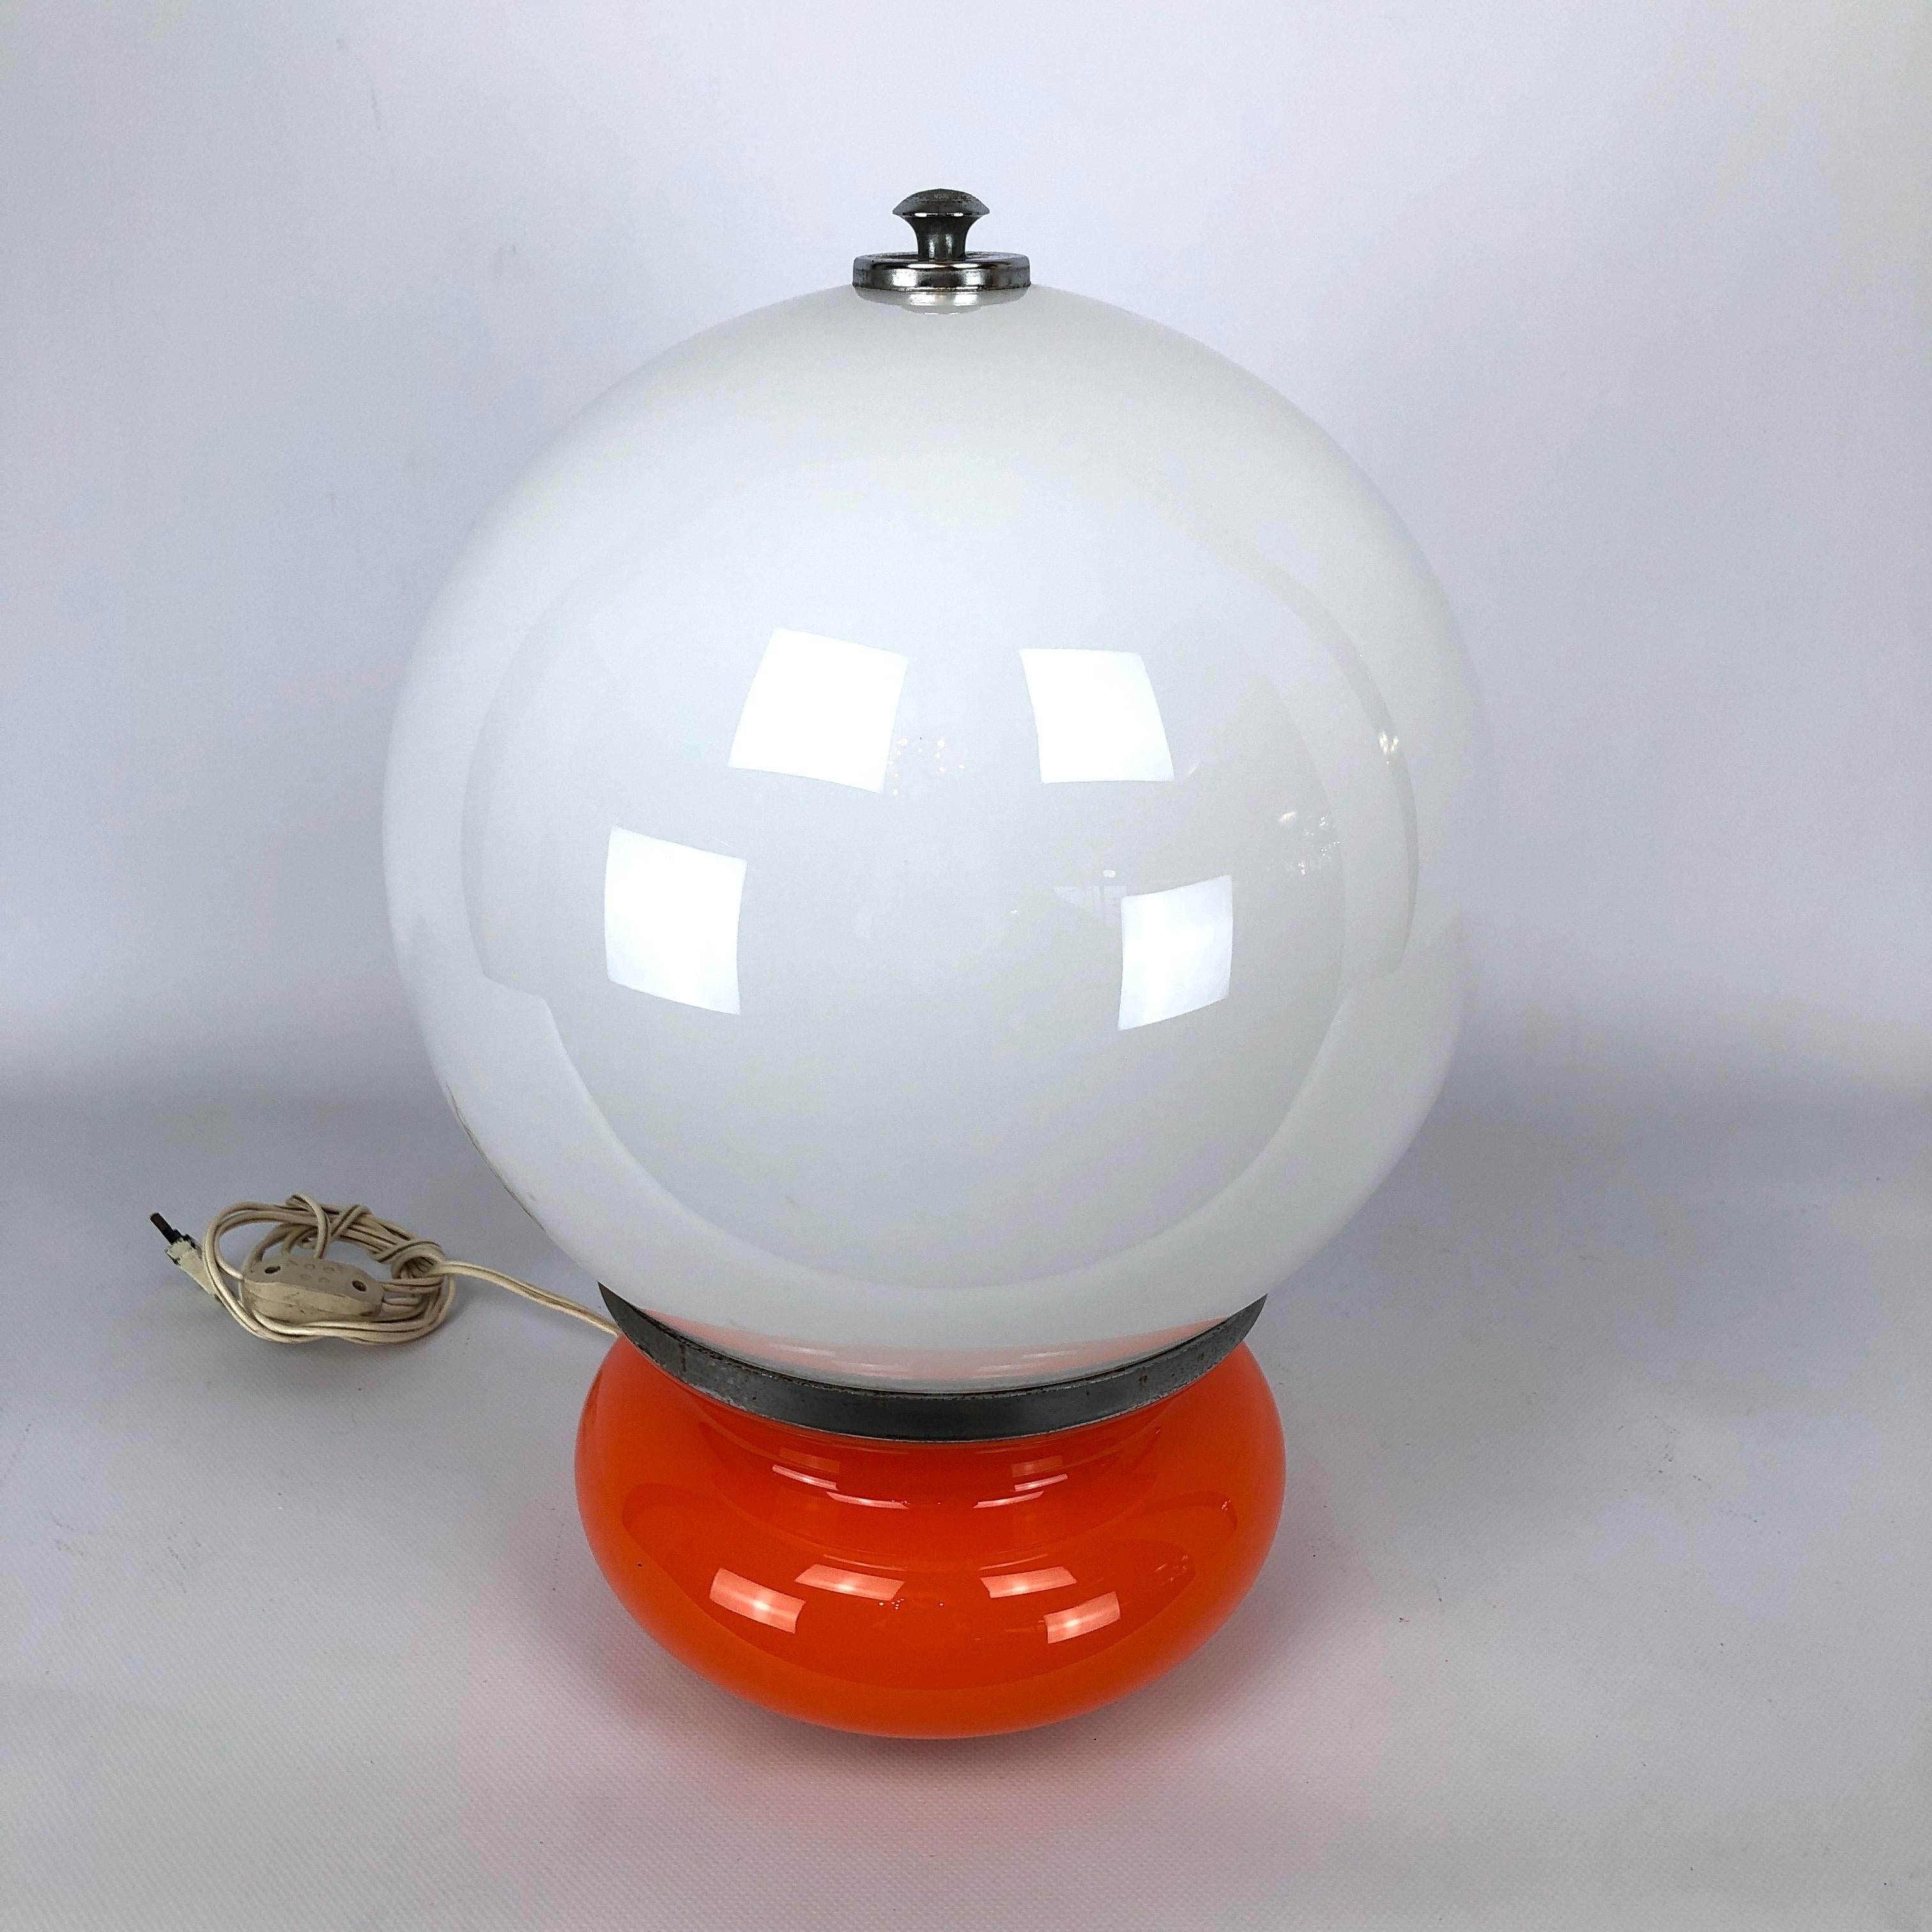 Good vintage condition with trace of age and use for this table lamp produced in Italy during the 70s. Full working with EU standard, adaptable on demand for USA standard.
